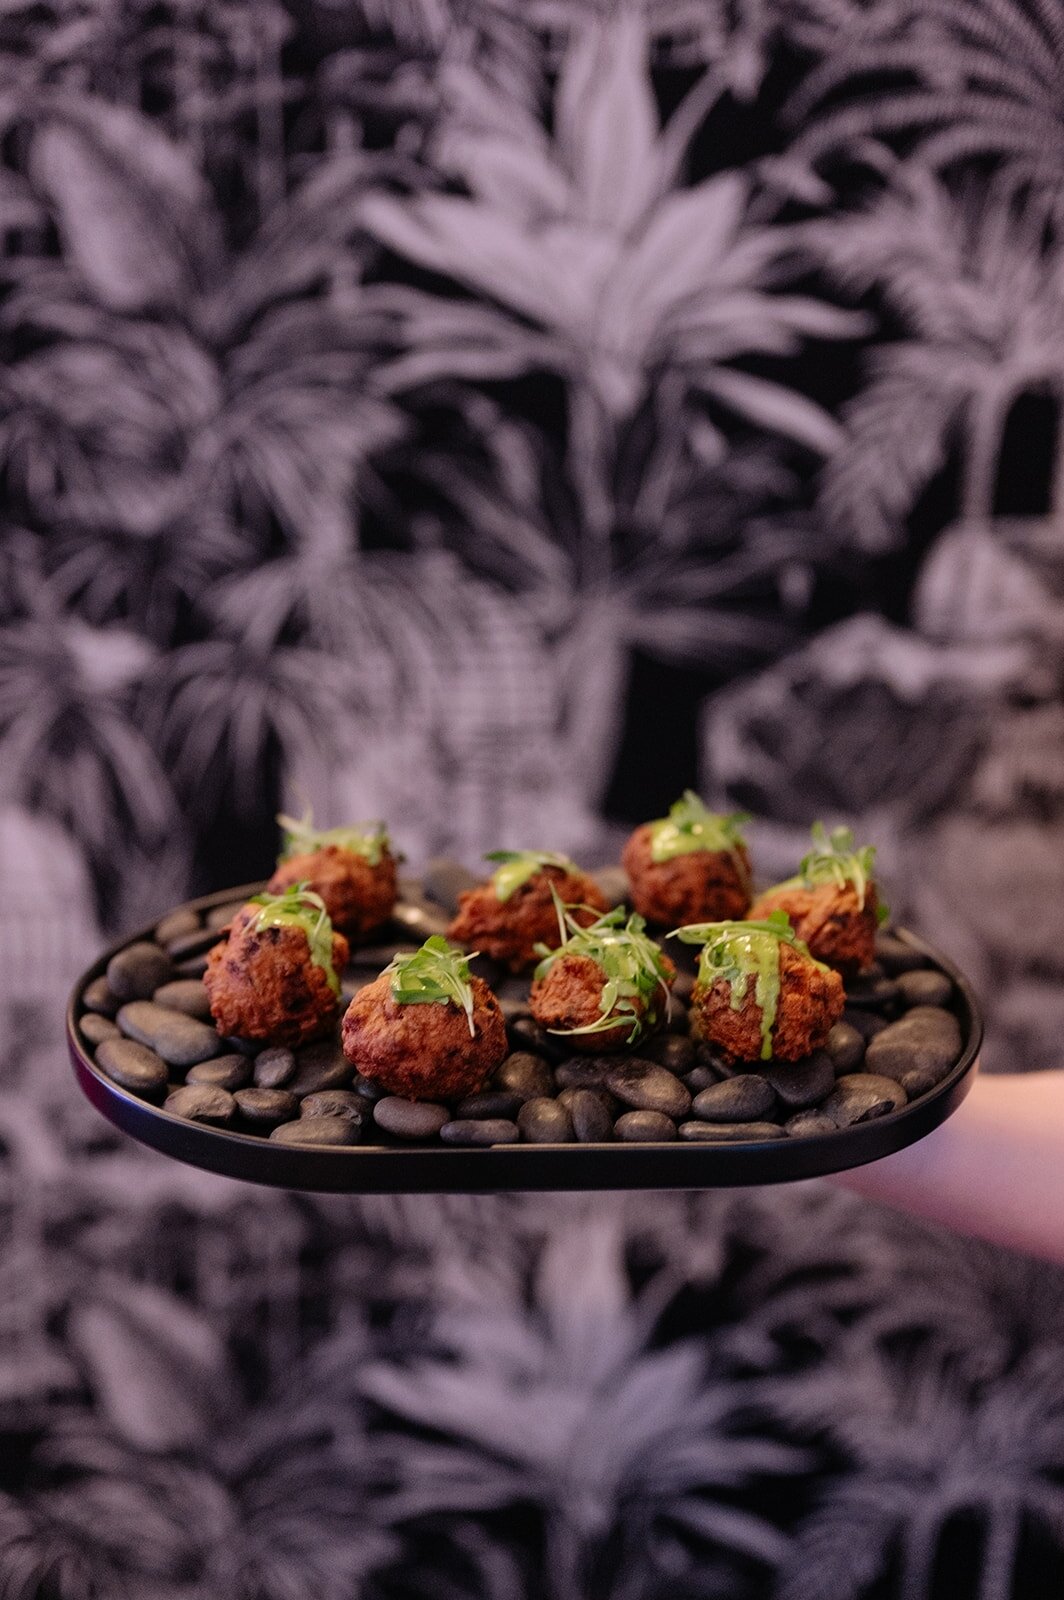 This divine canape made its premiere at our recent &quot;El Borde&quot; event - the Crispy Conch Fritter.
-Caribbean conch fritter with salsa verde &amp; micro cilantro.
It is truly the most perfect bite. 
..
Whether you want to add this incredible n